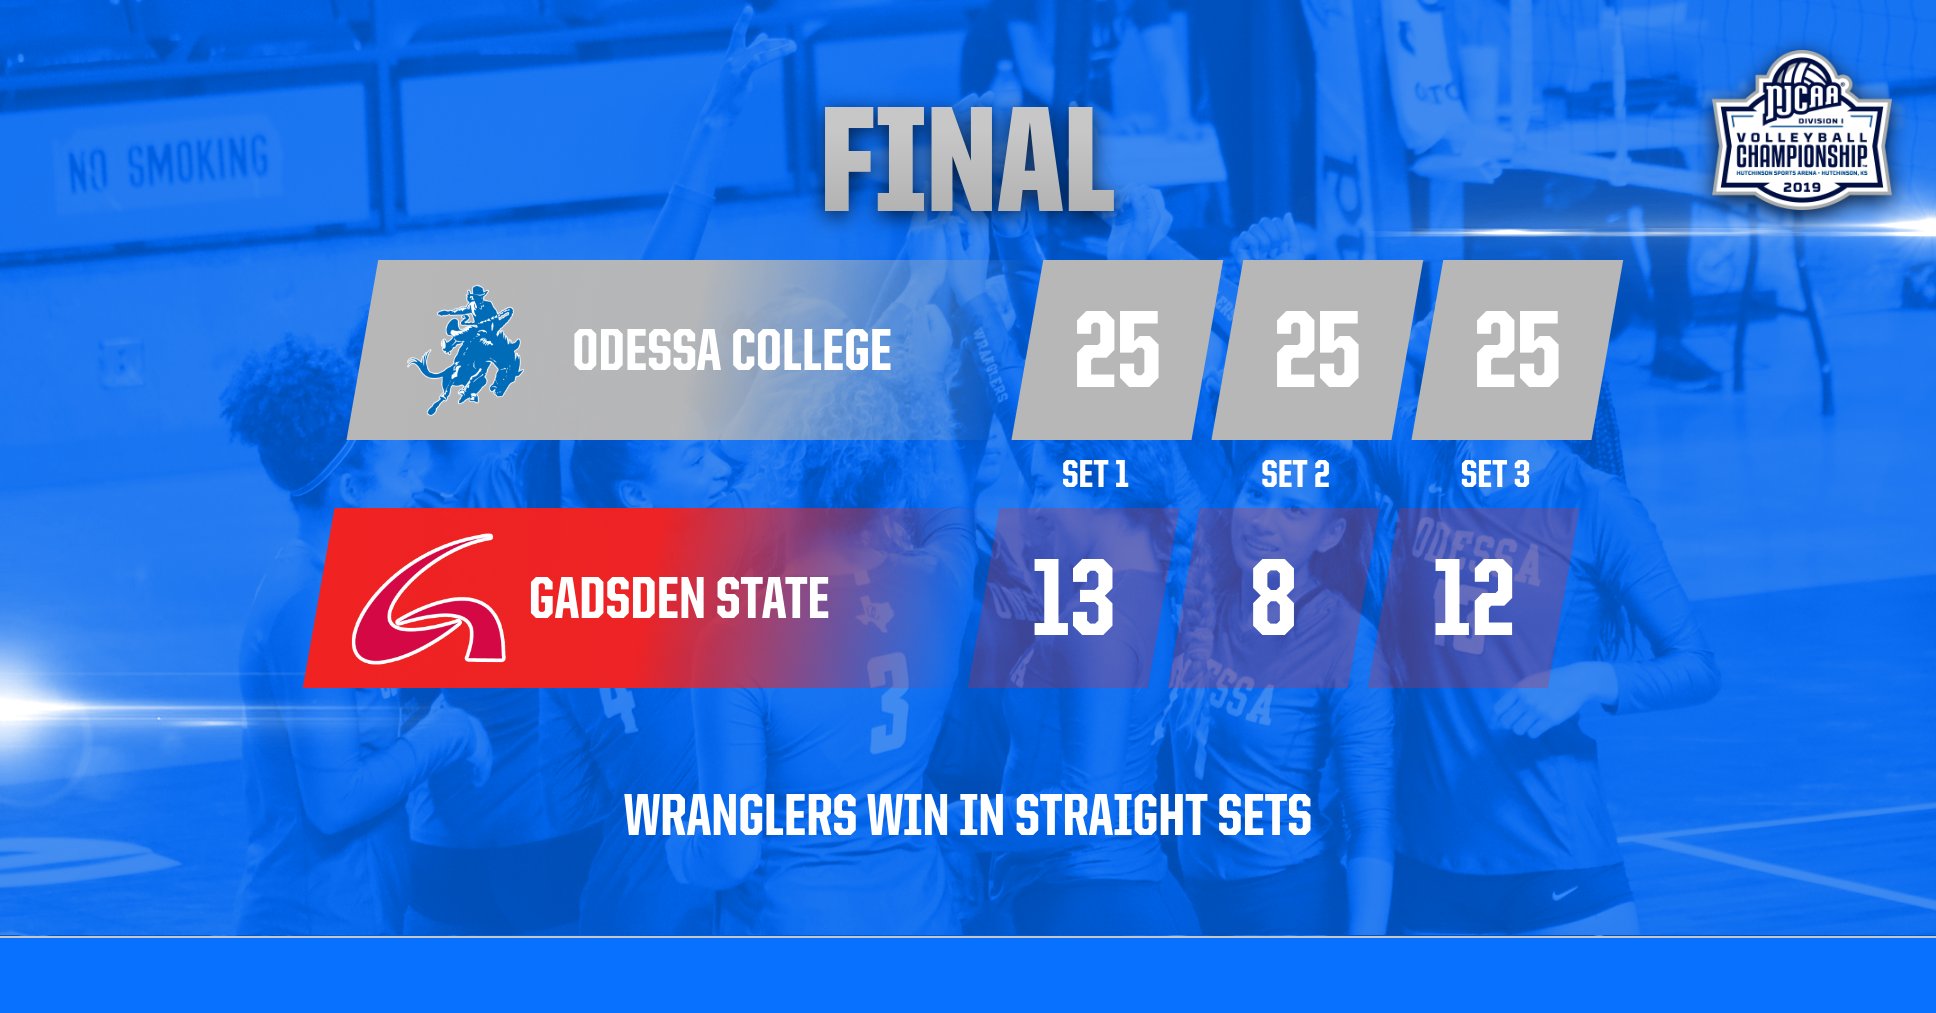 Wranglers defeat Gadsden State in Straight Sets